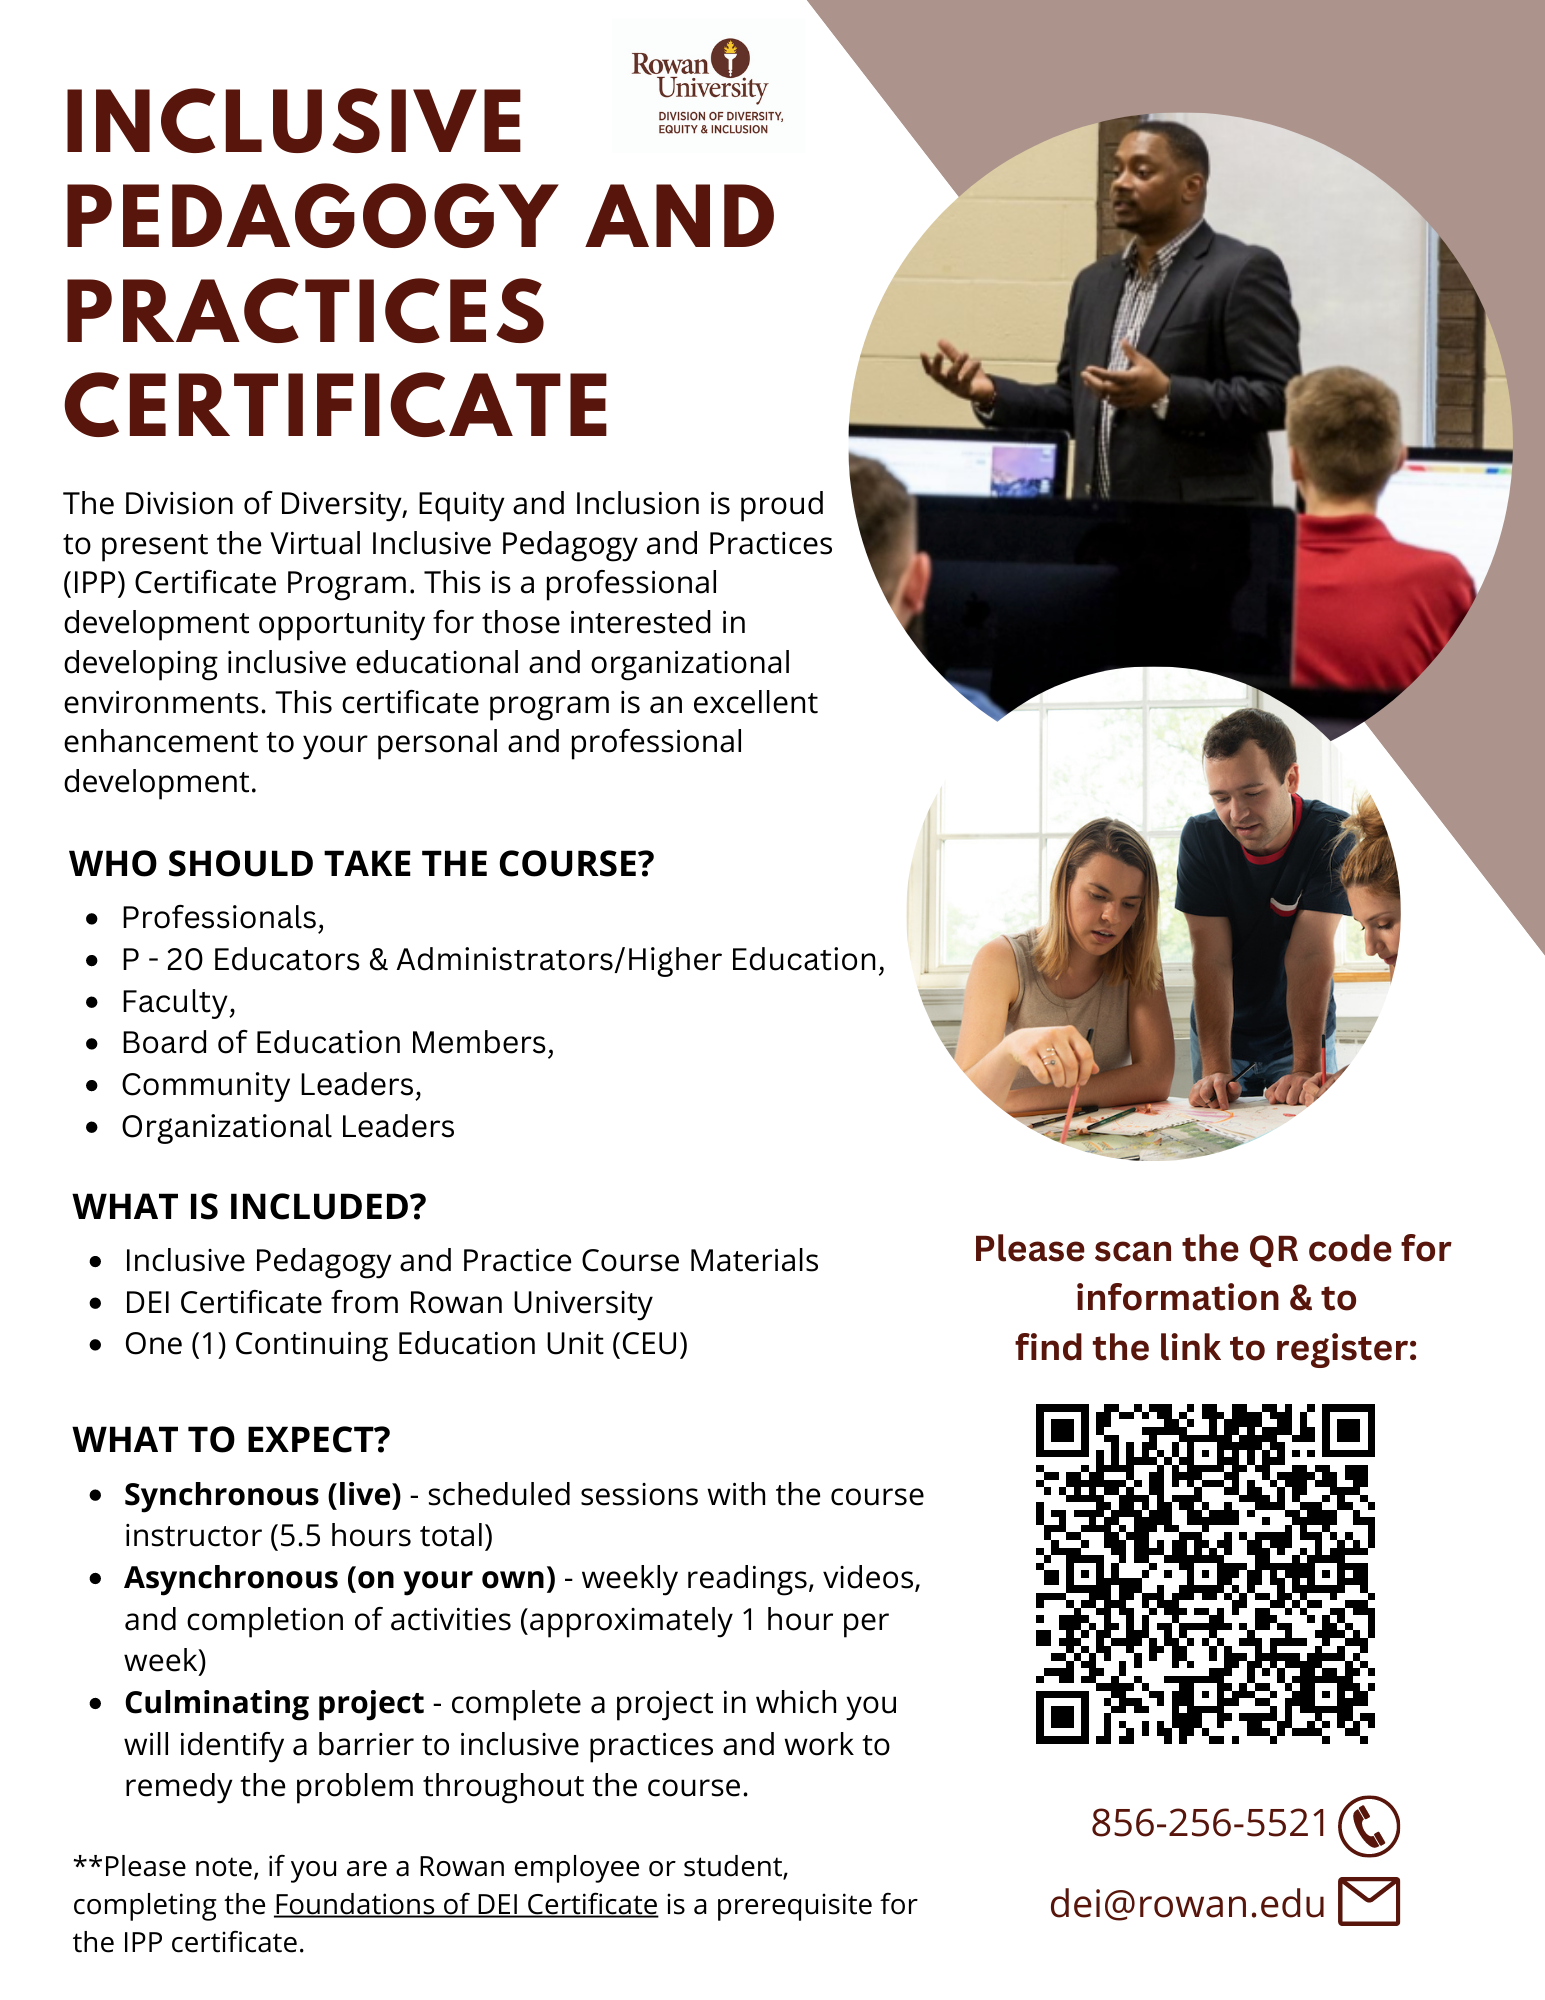 General information flyer for the Inclusive Pedagogy and Practices Certificate, please click the image for a PDF version of this flyer